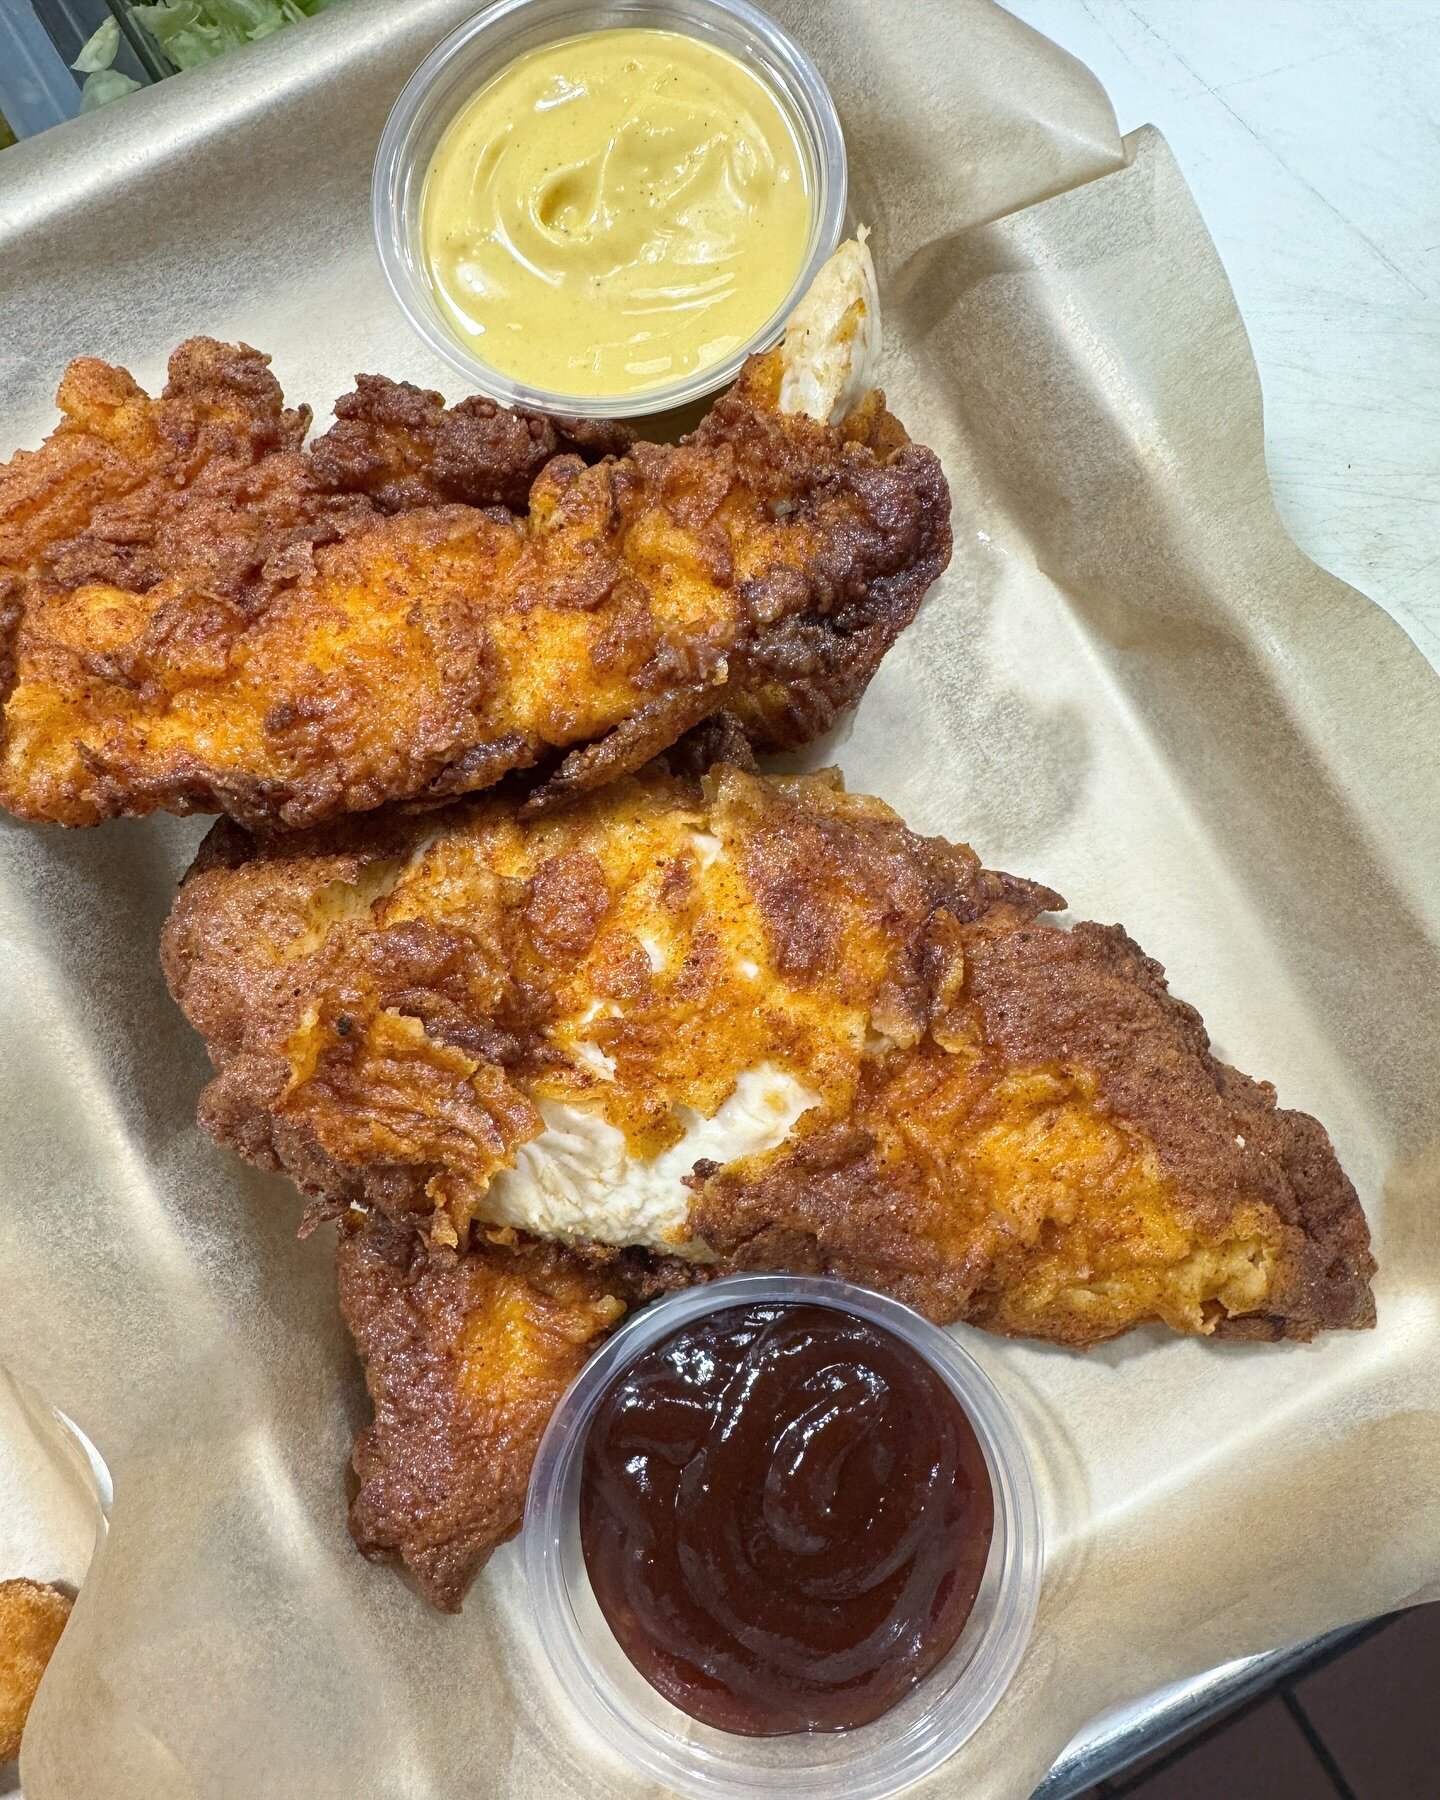 Did you know our tenders are hand breaded and made to order? And they are HUGE!